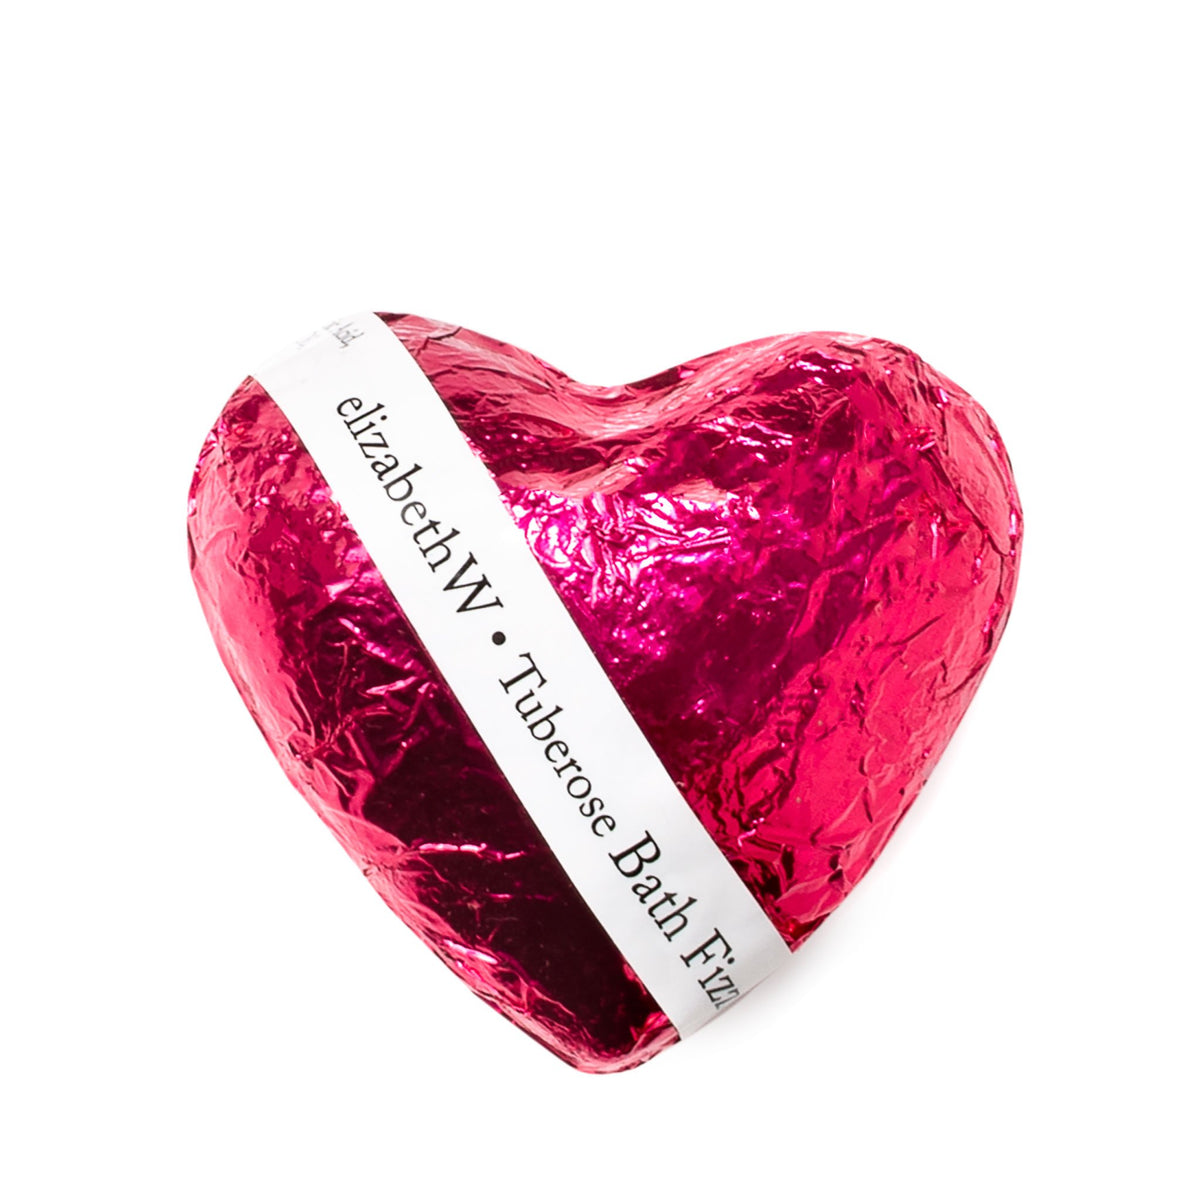 A shiny pink foil-wrapped heart-shaped elizabeth W Fizz Heart - Tuberose with a white label that reads "elizabethW tuberose bath fizzy." The background is pure white, emphasizing the product.